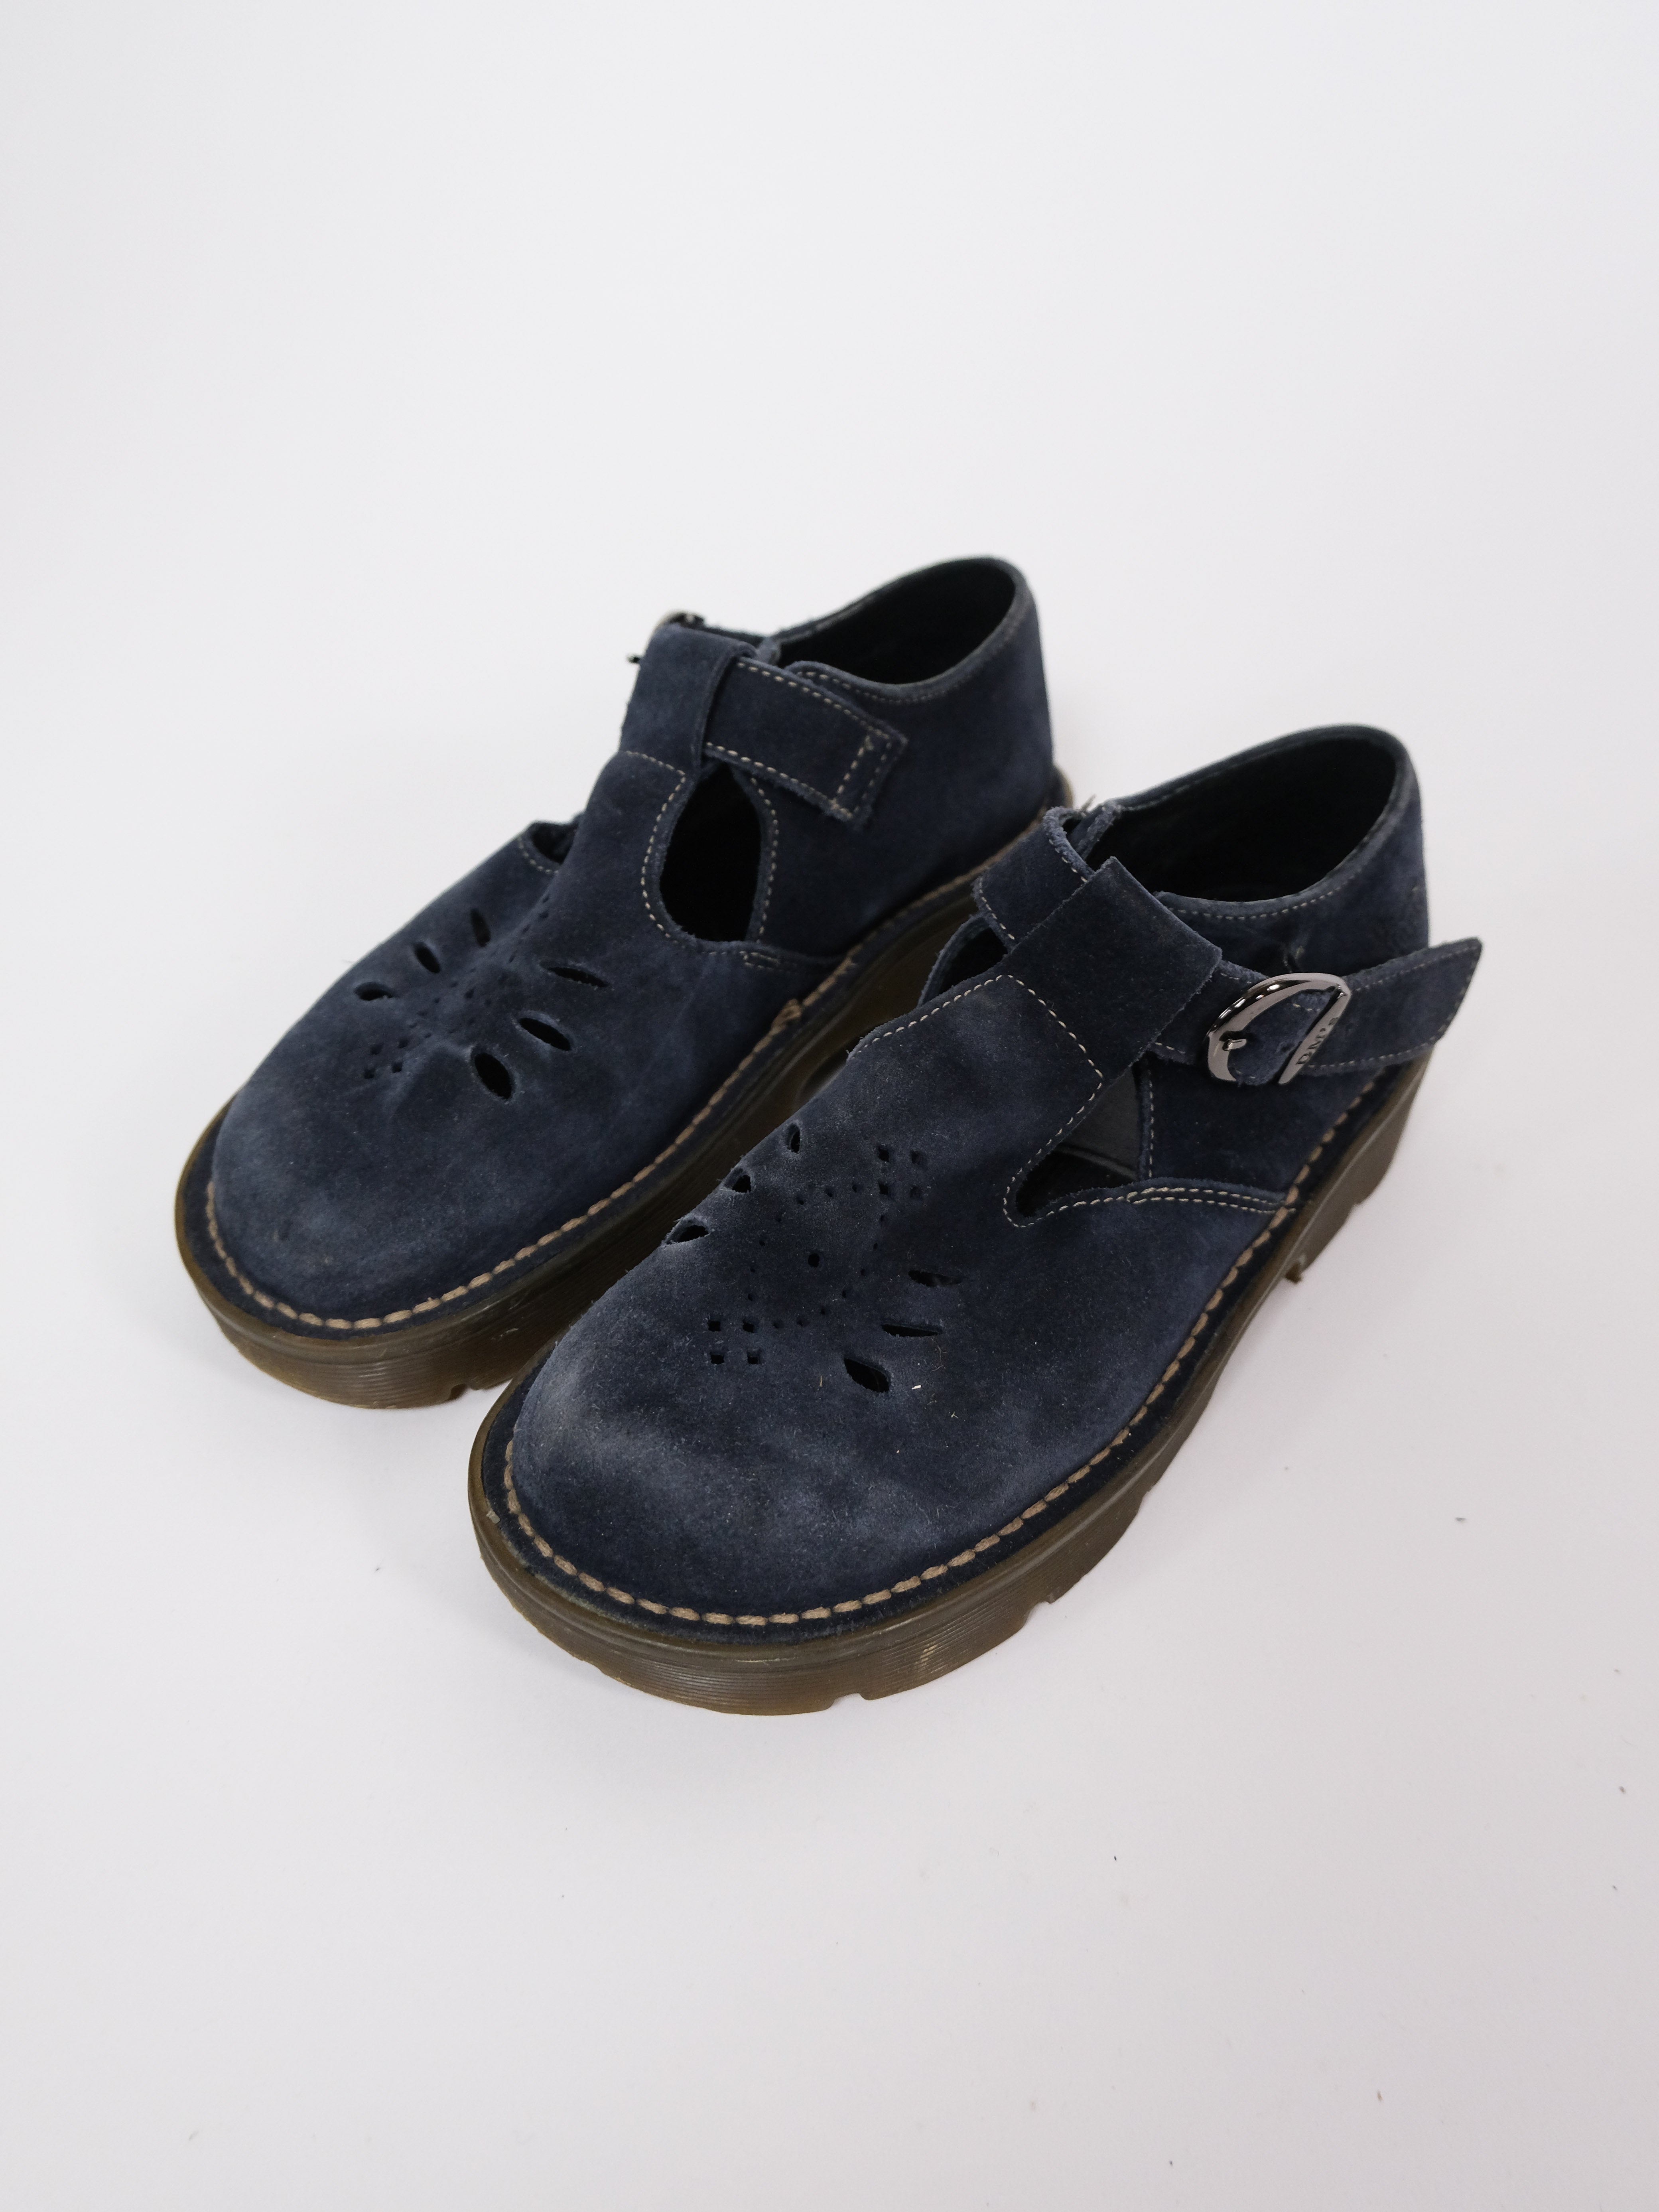 Dr. Martens Mary Jane's blue suede